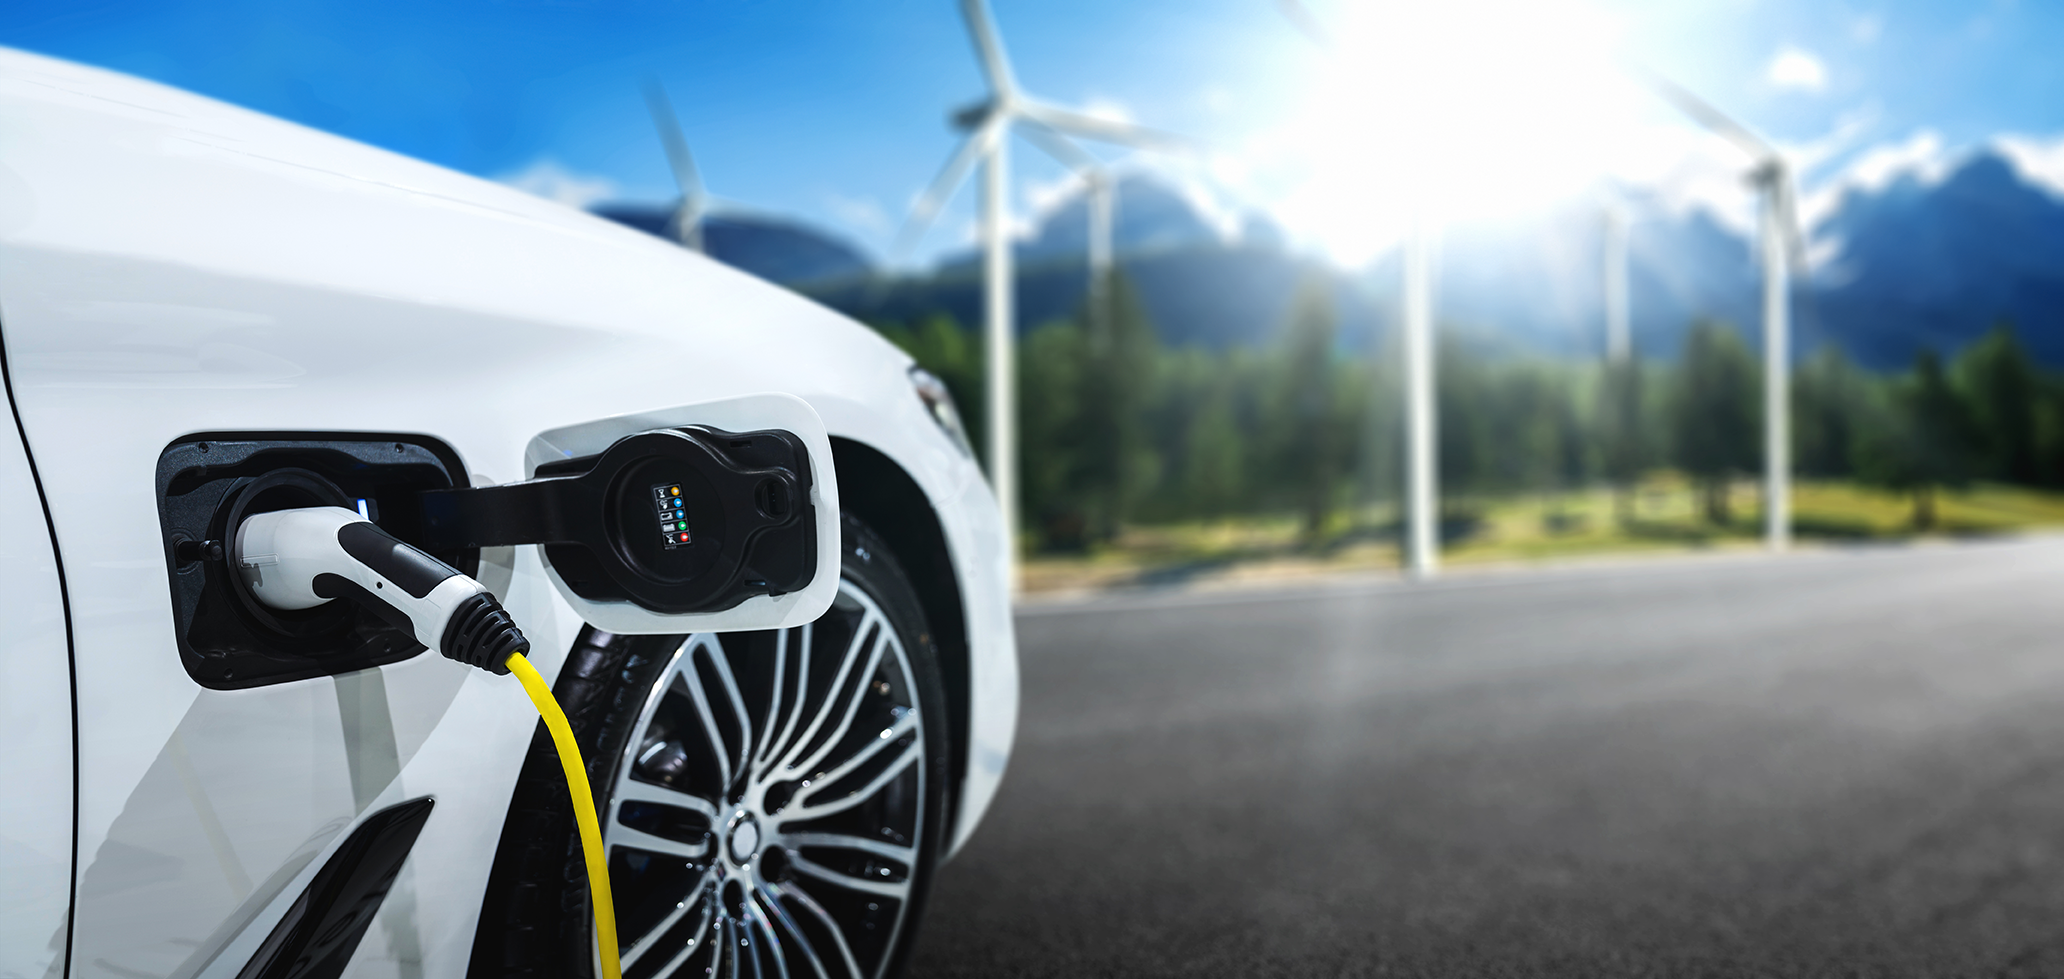 The benefits of electric vehicles